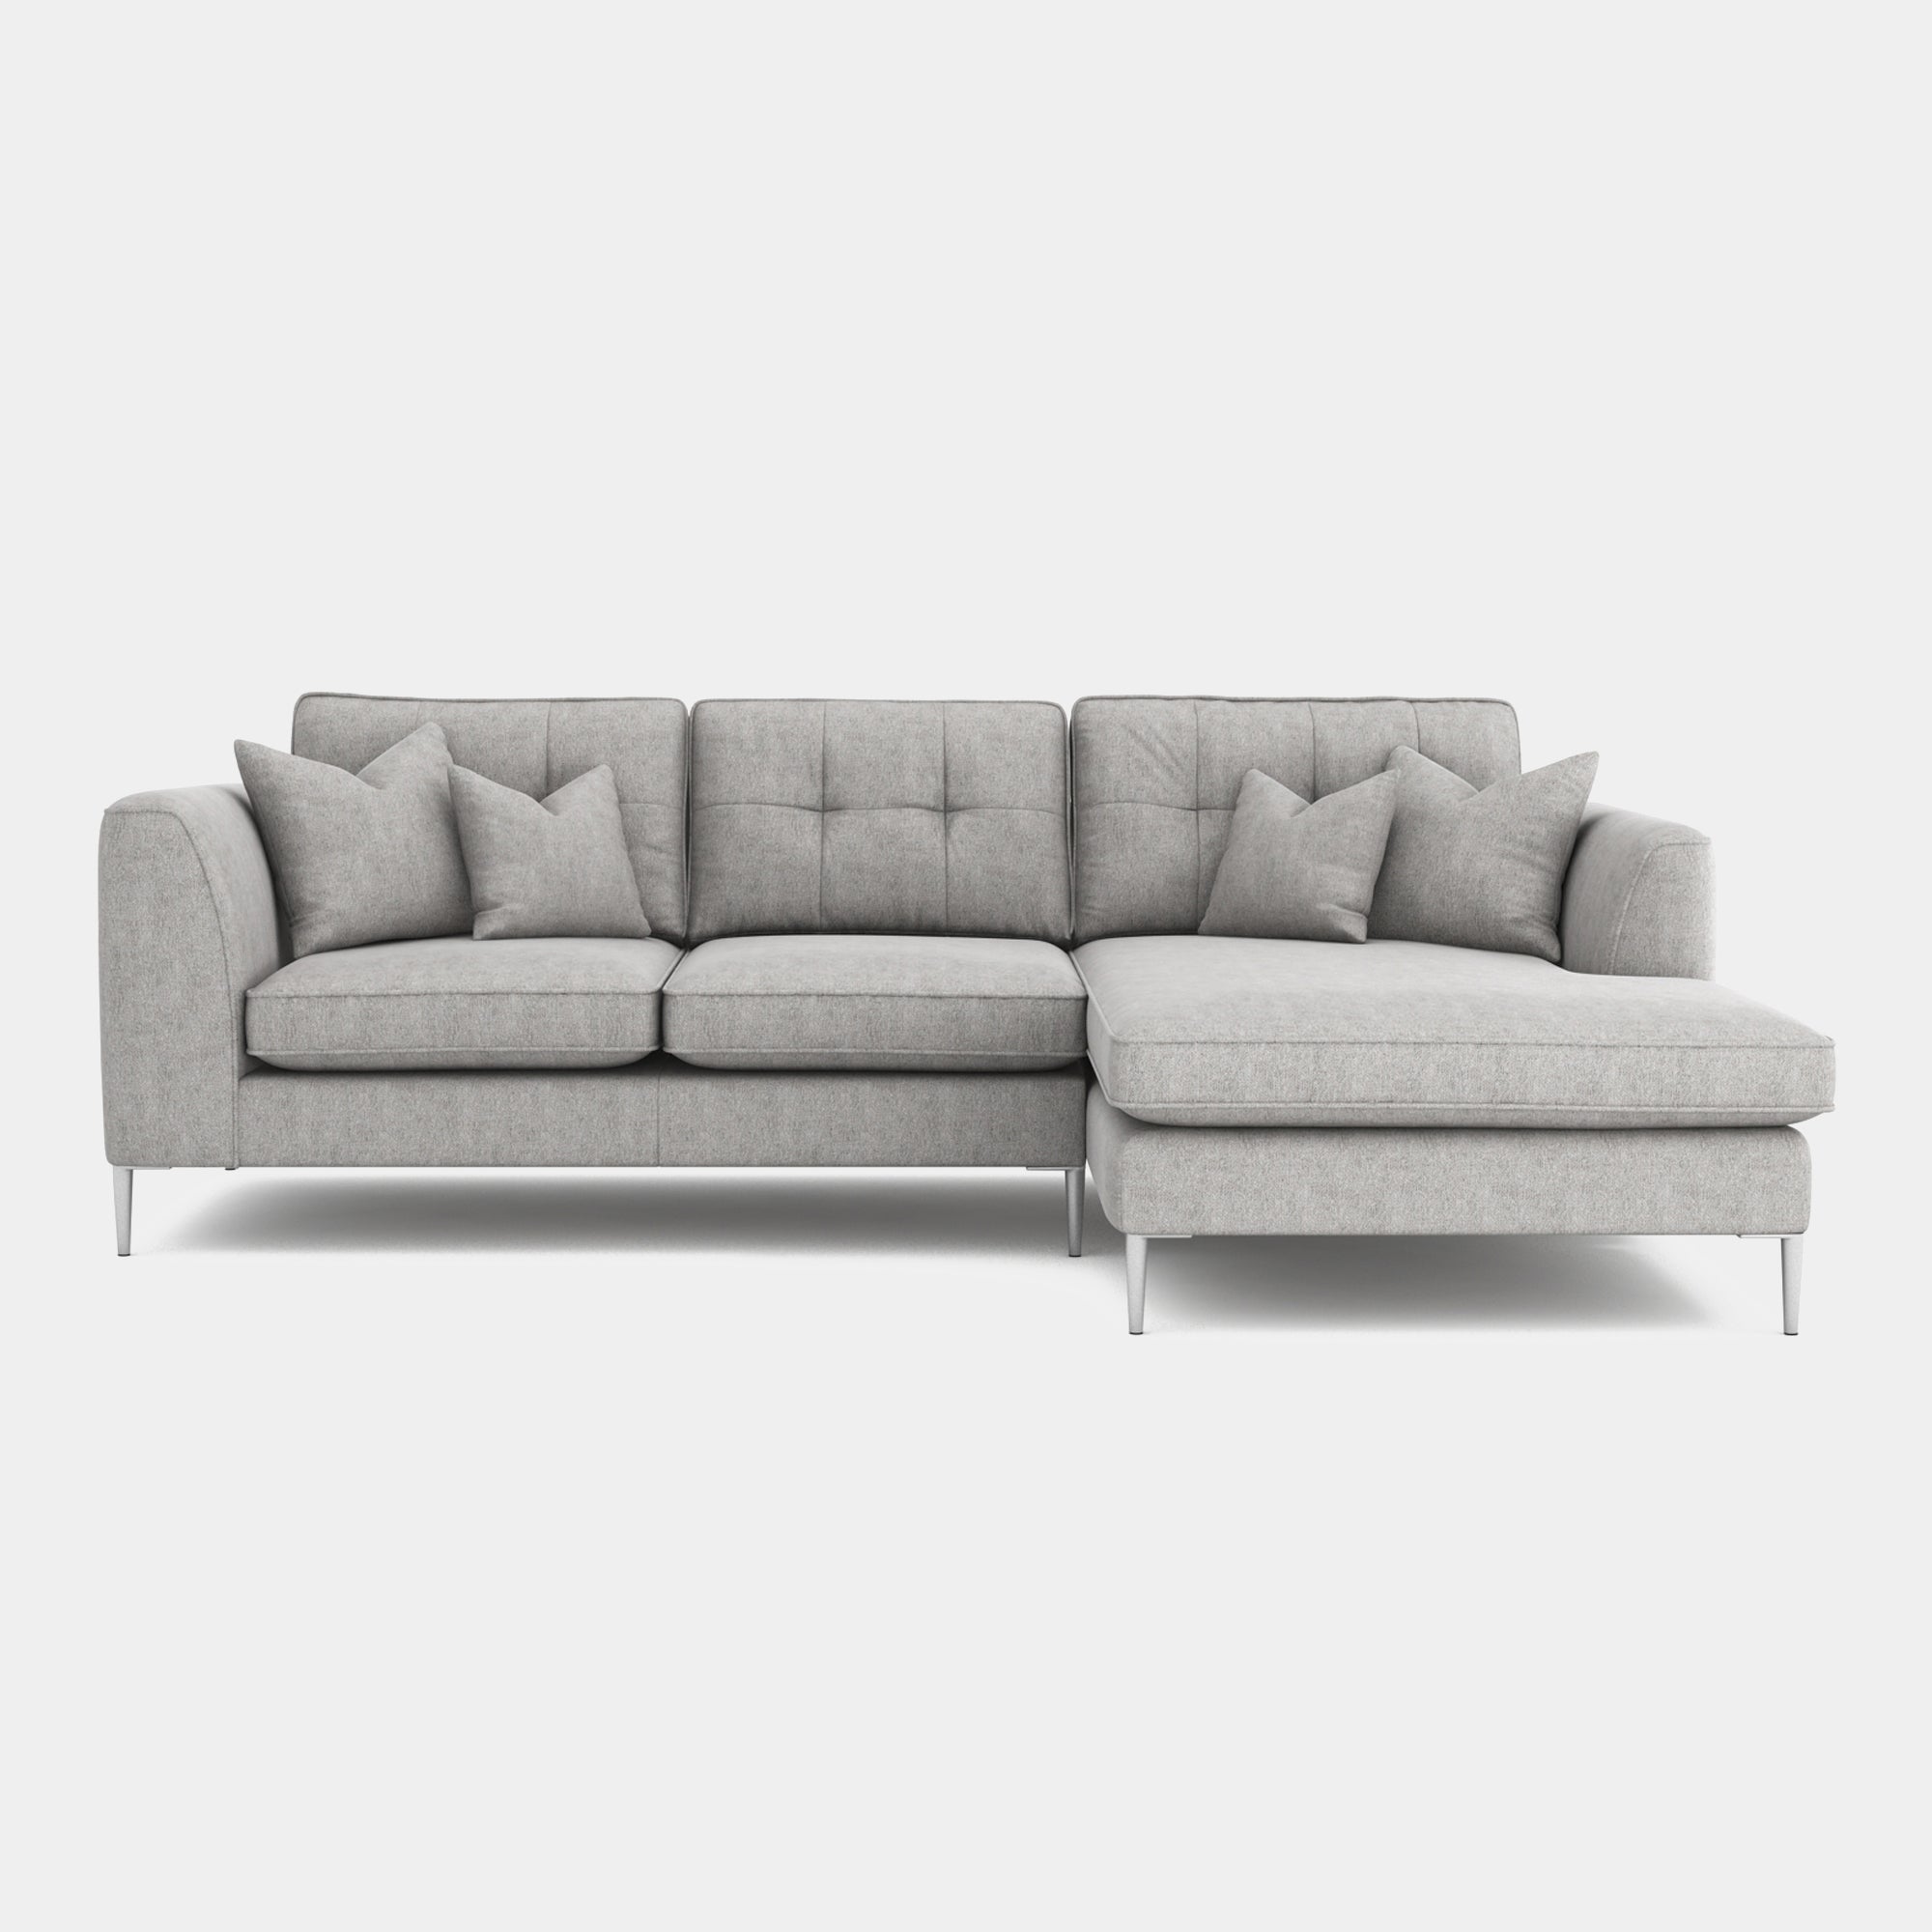 Colorado - Standard Back Small Chaise Sofa 3 Seat 1 Arm LHF With Chaise RHF In Grade B Fabric